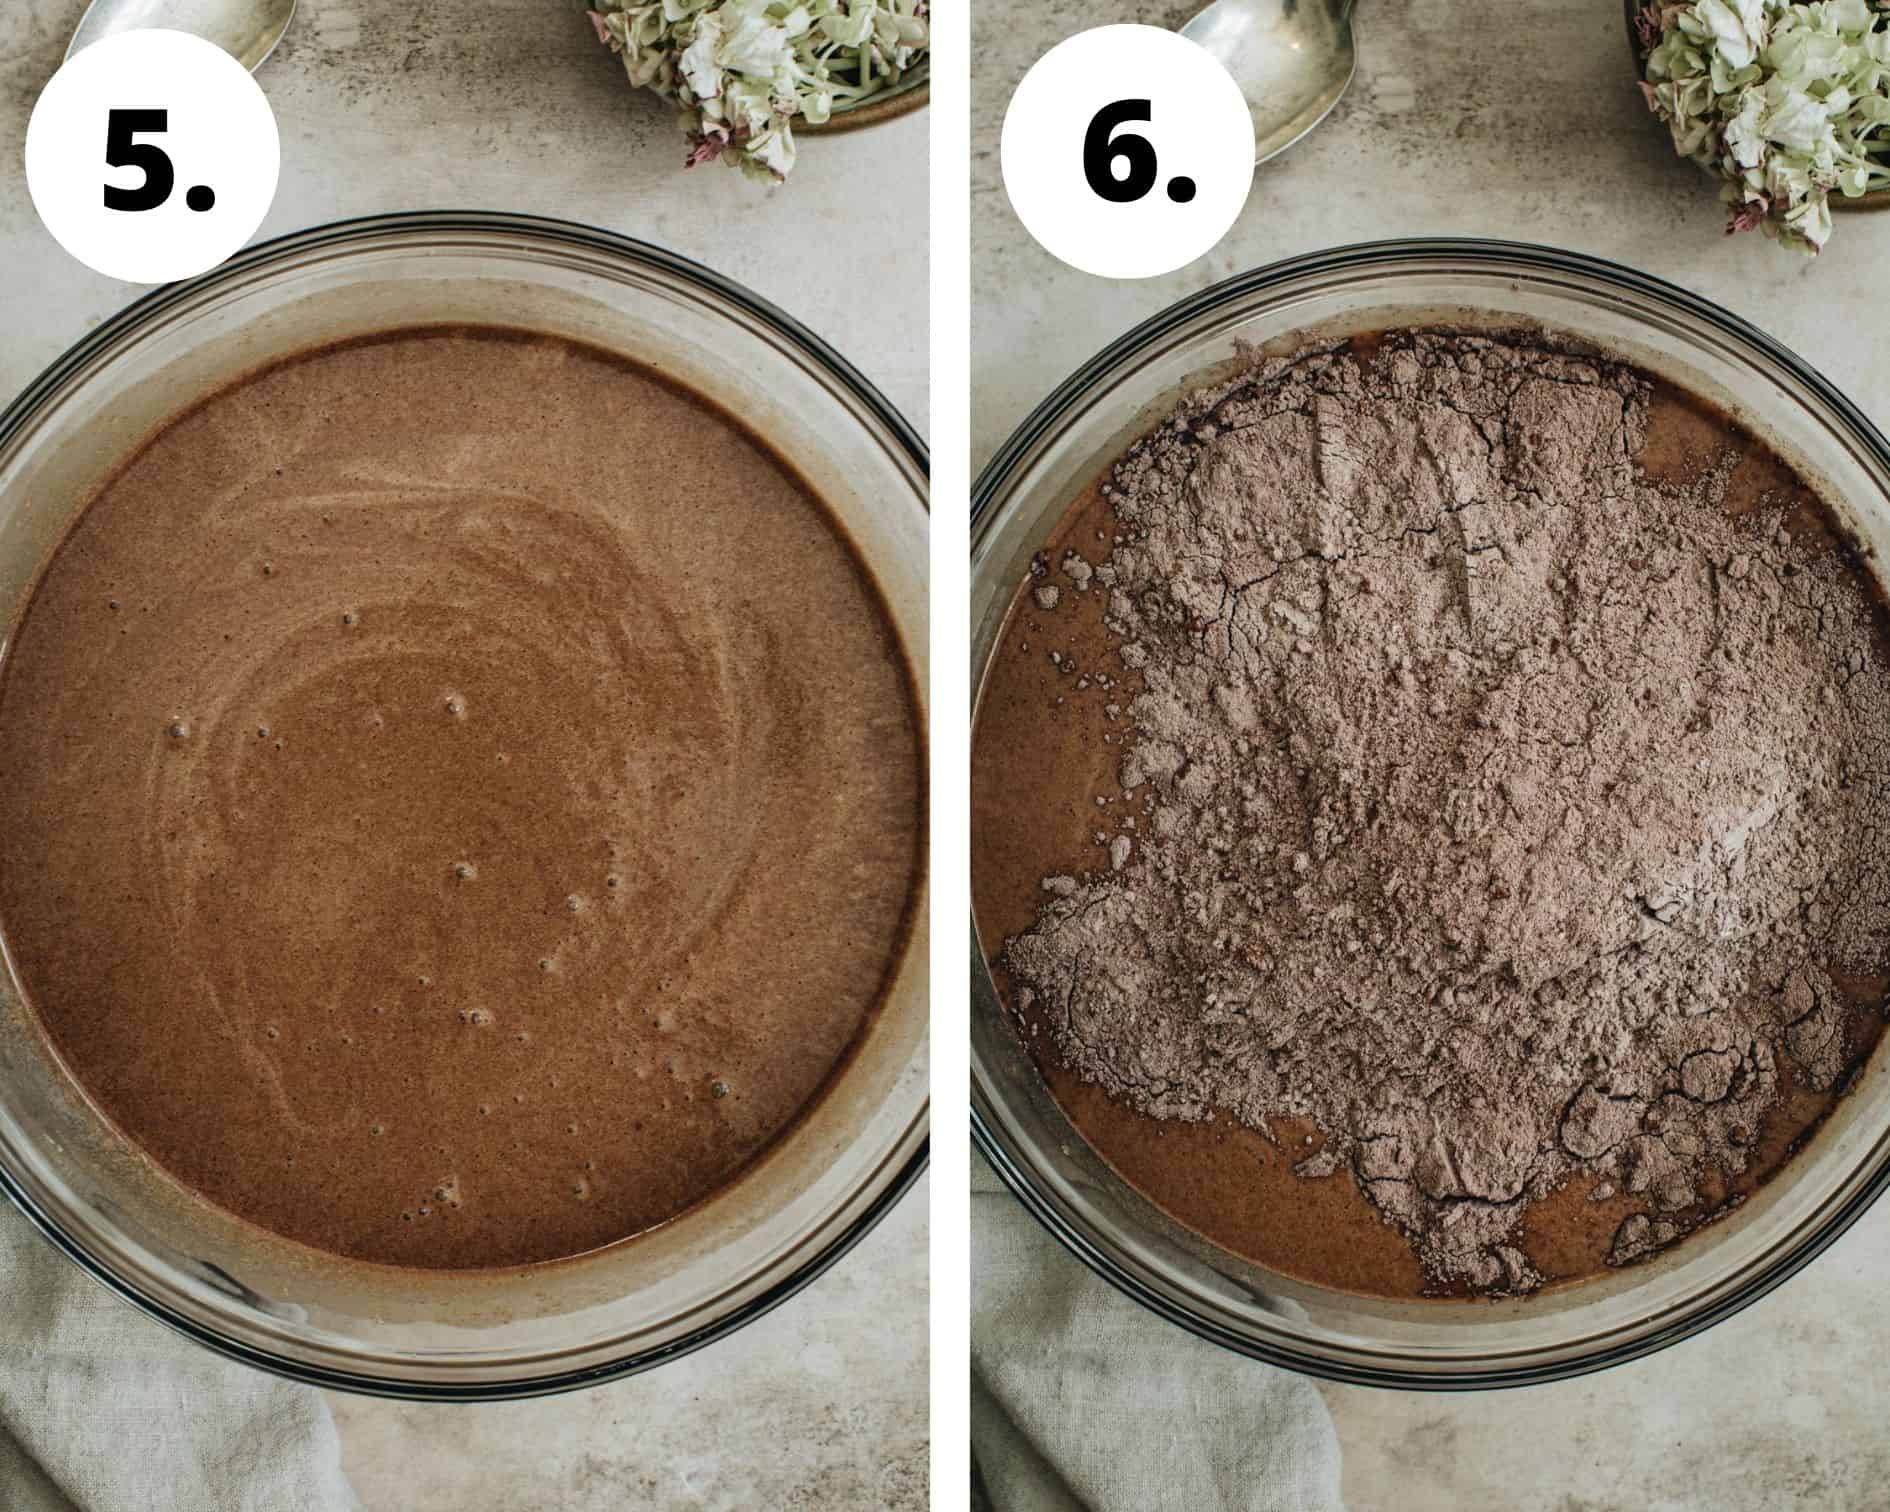 Brownie cake process steps 5 and 6.